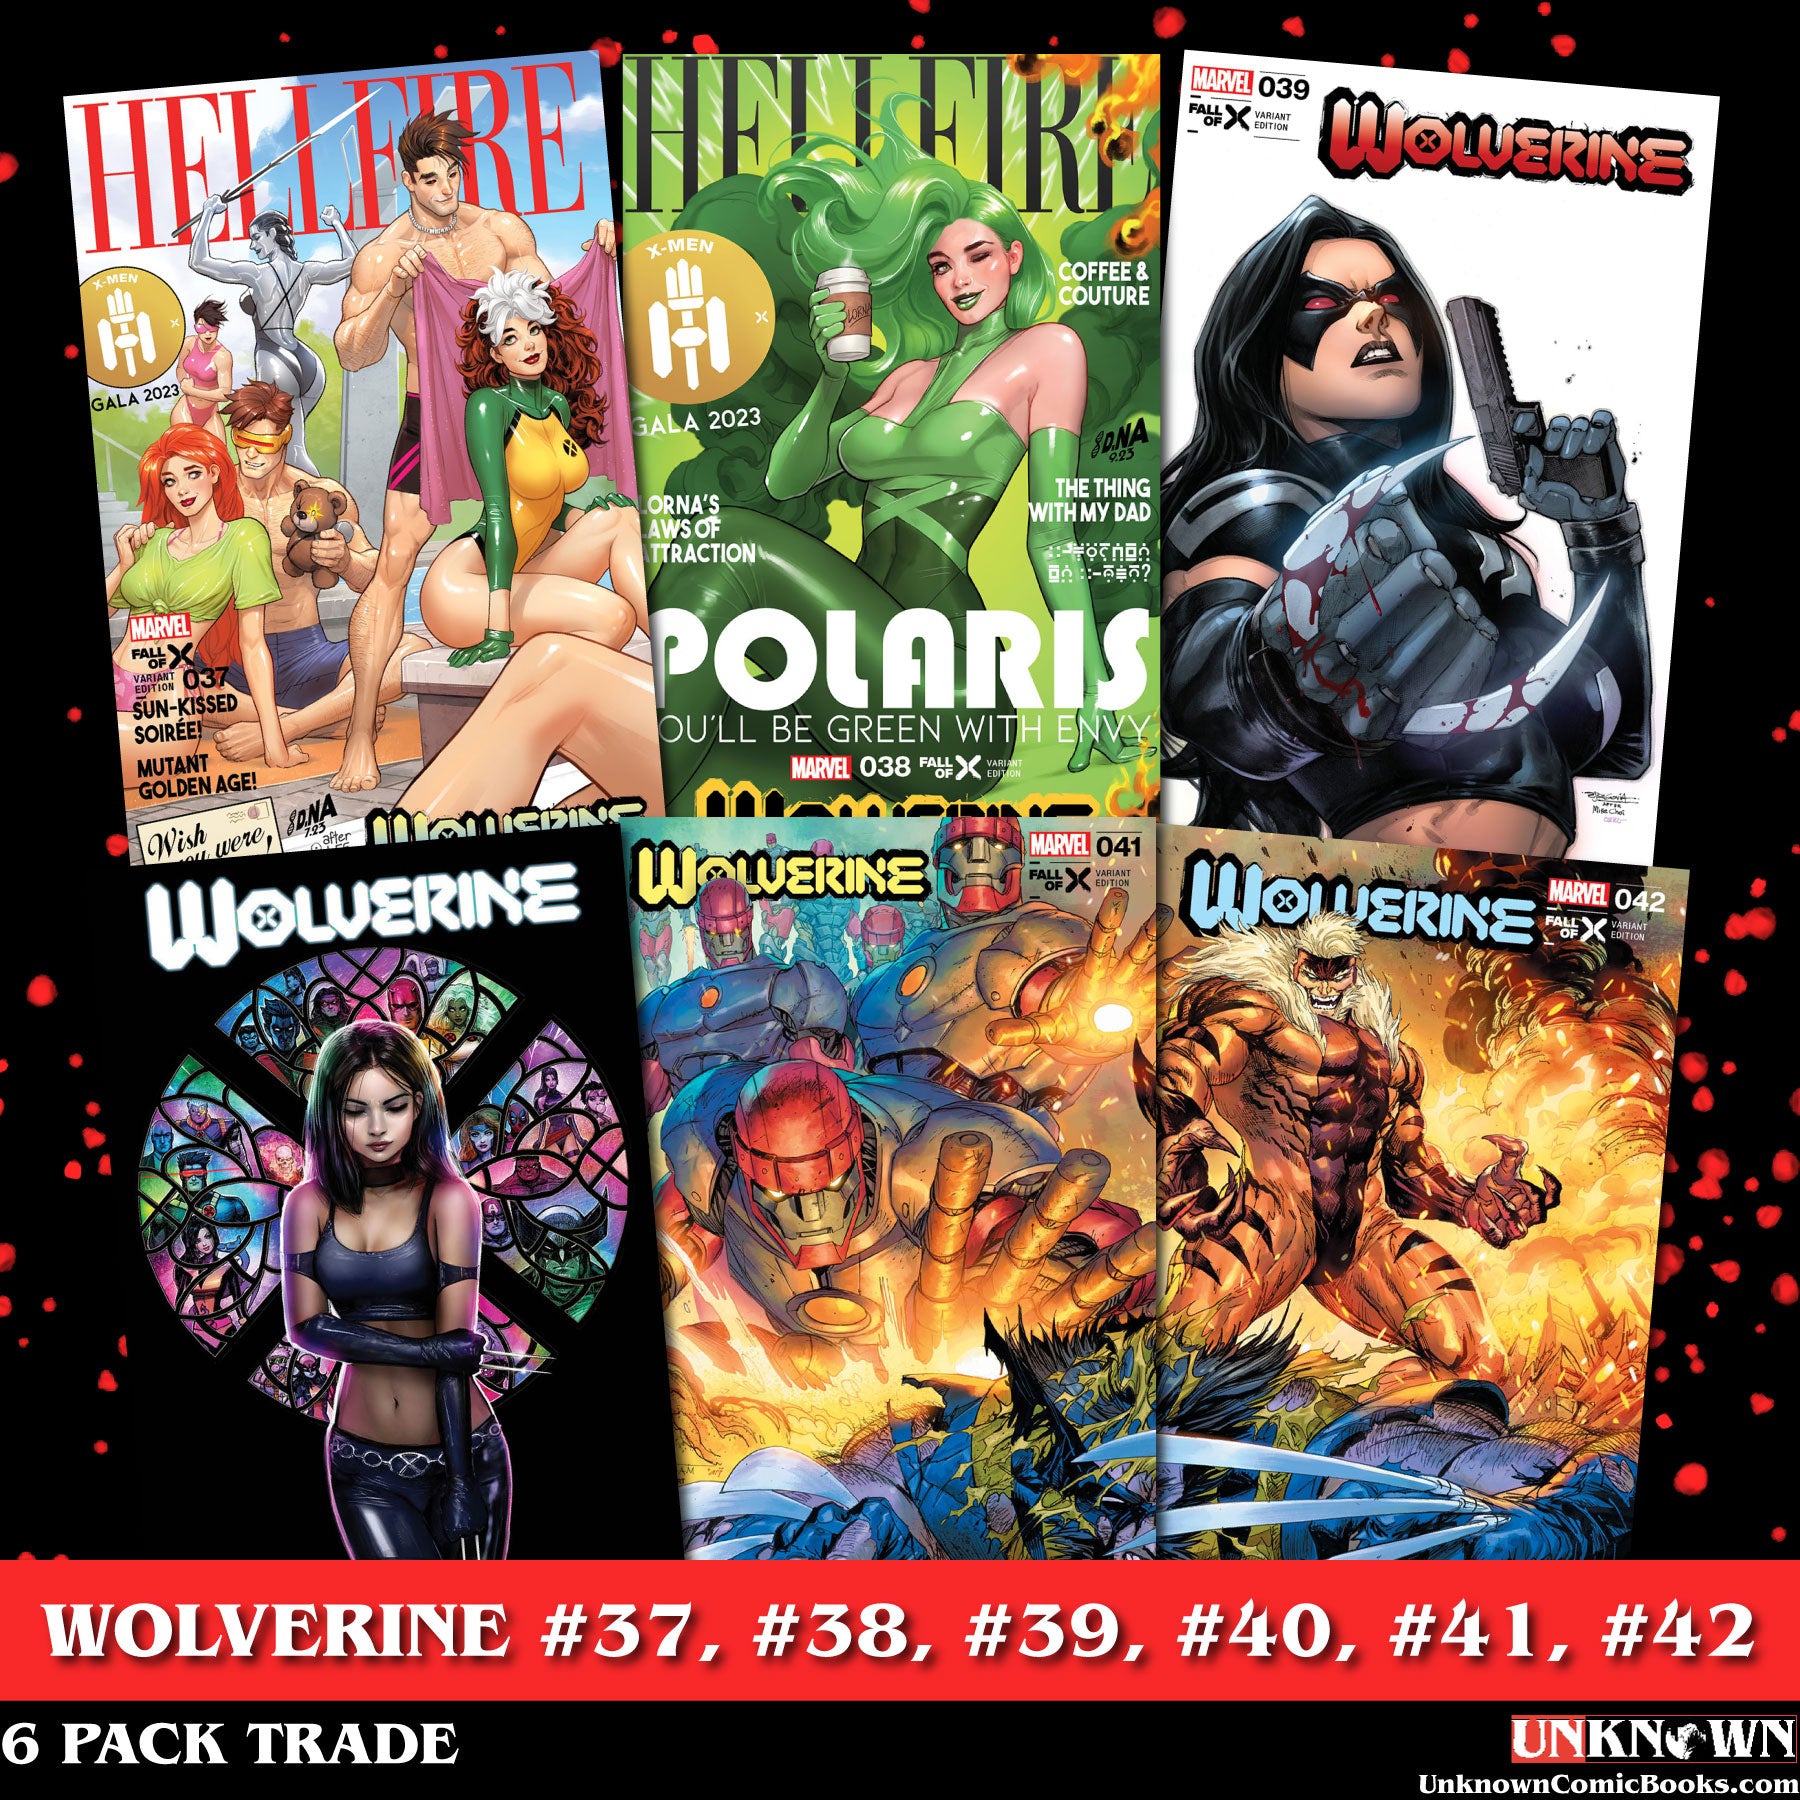 [6 PACK TRADE] WOLVERINE (#37-#42) 37, 38, 39, 40, 41, 42 UNKNOWN COMICS EXCLUSIVE VAR (01/31/2024)